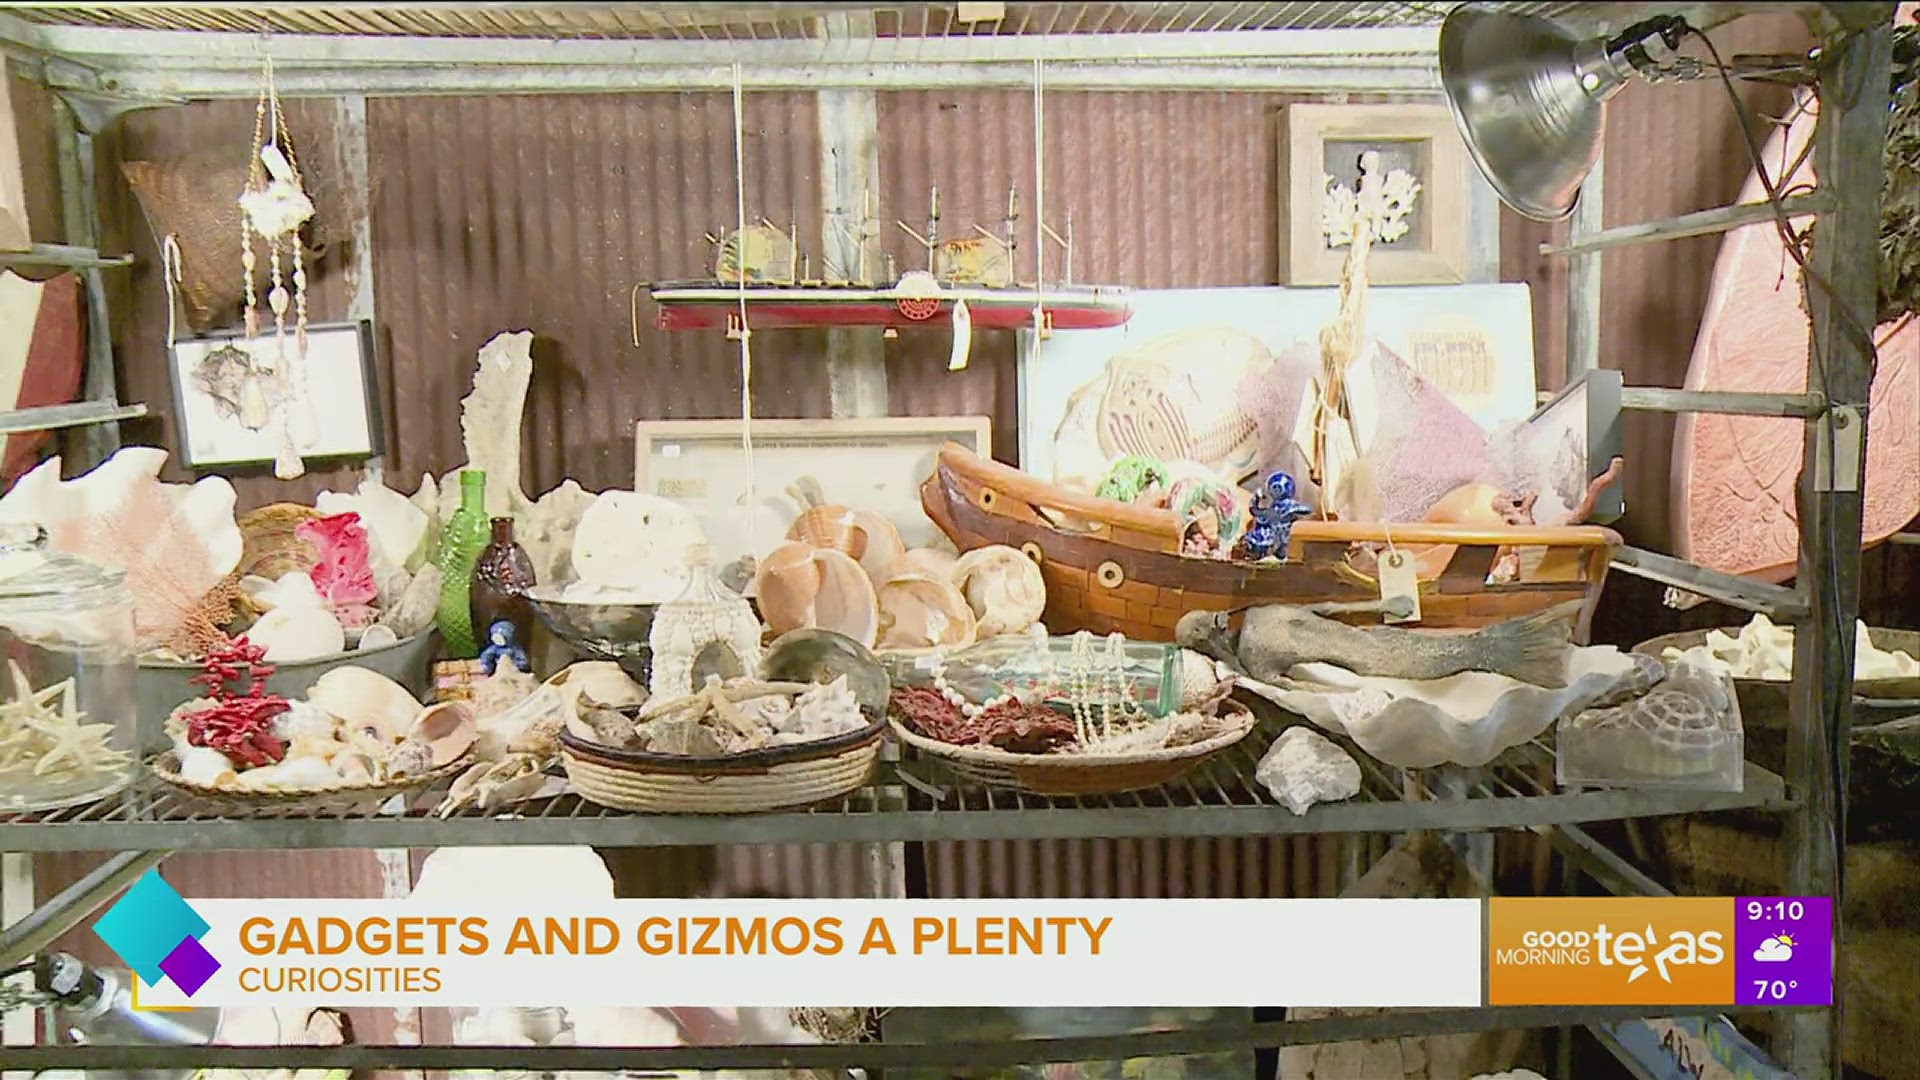 Paige stops by Curiosities Antiques to find gadgets and gizmos inspired by "The Little Mermaid"